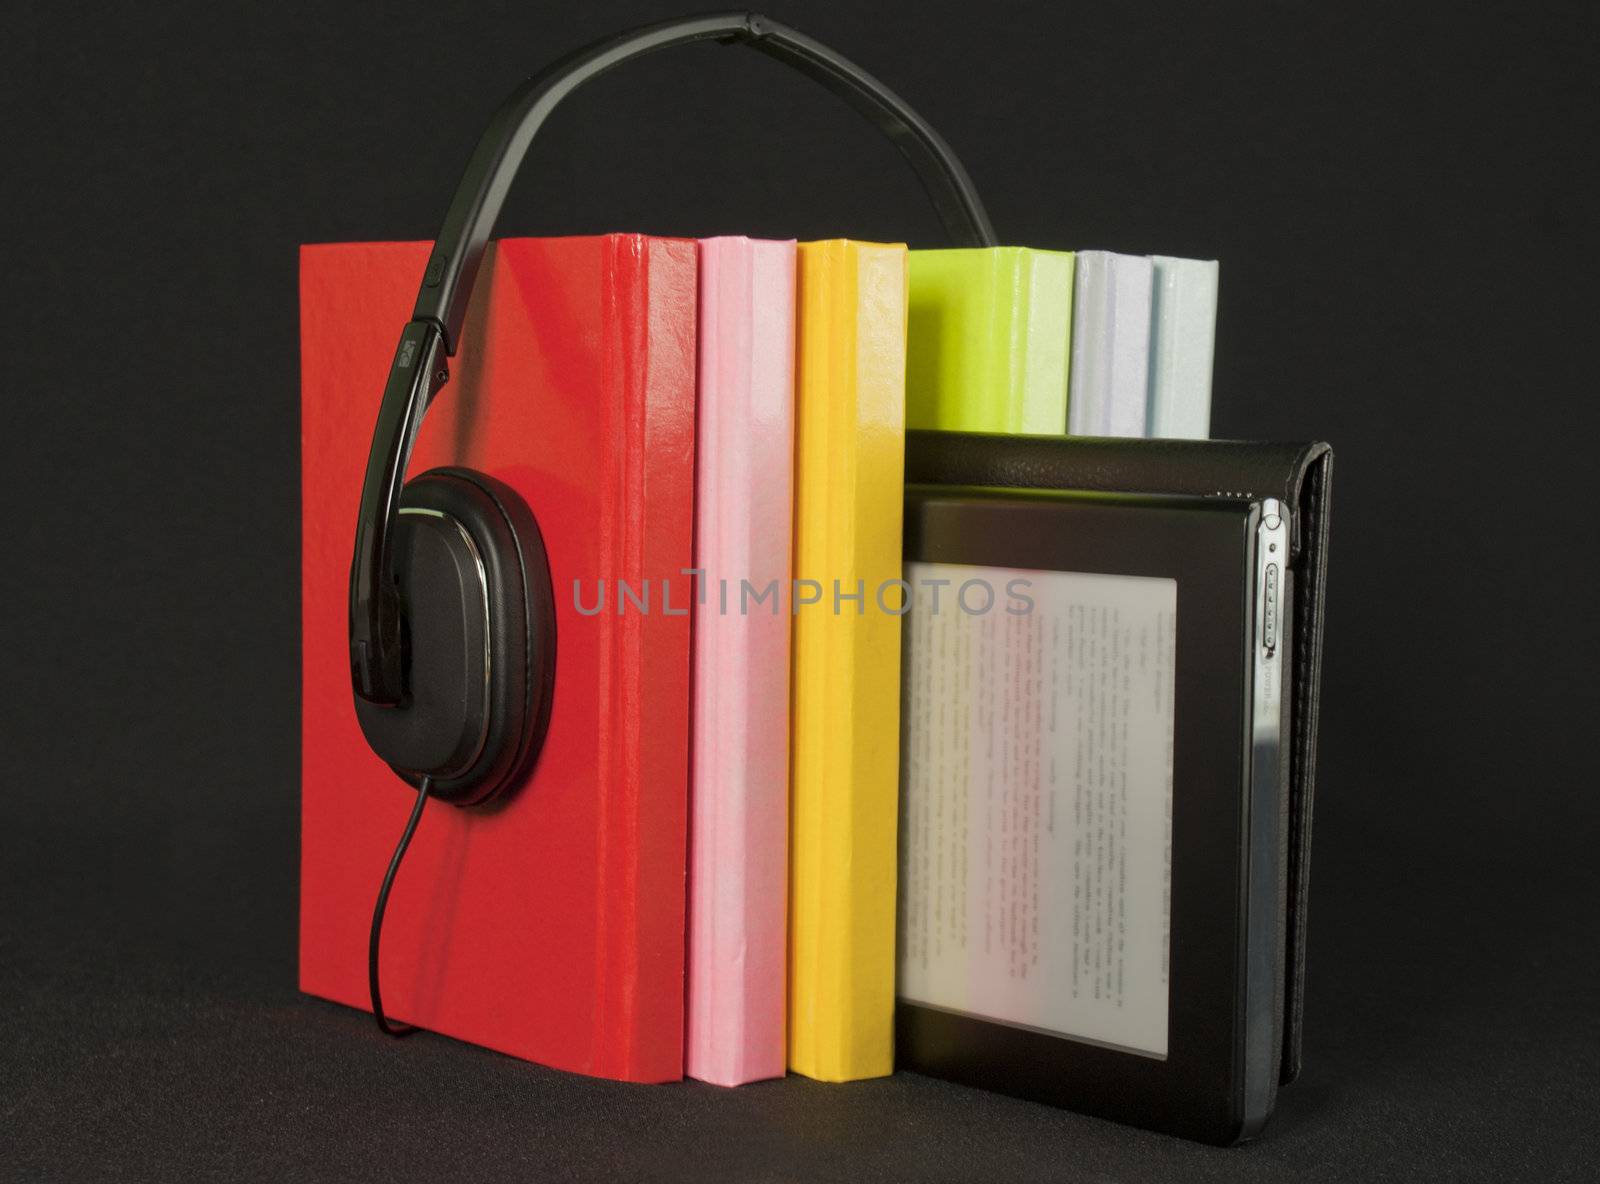 Audiobooks concept by AndreyKr